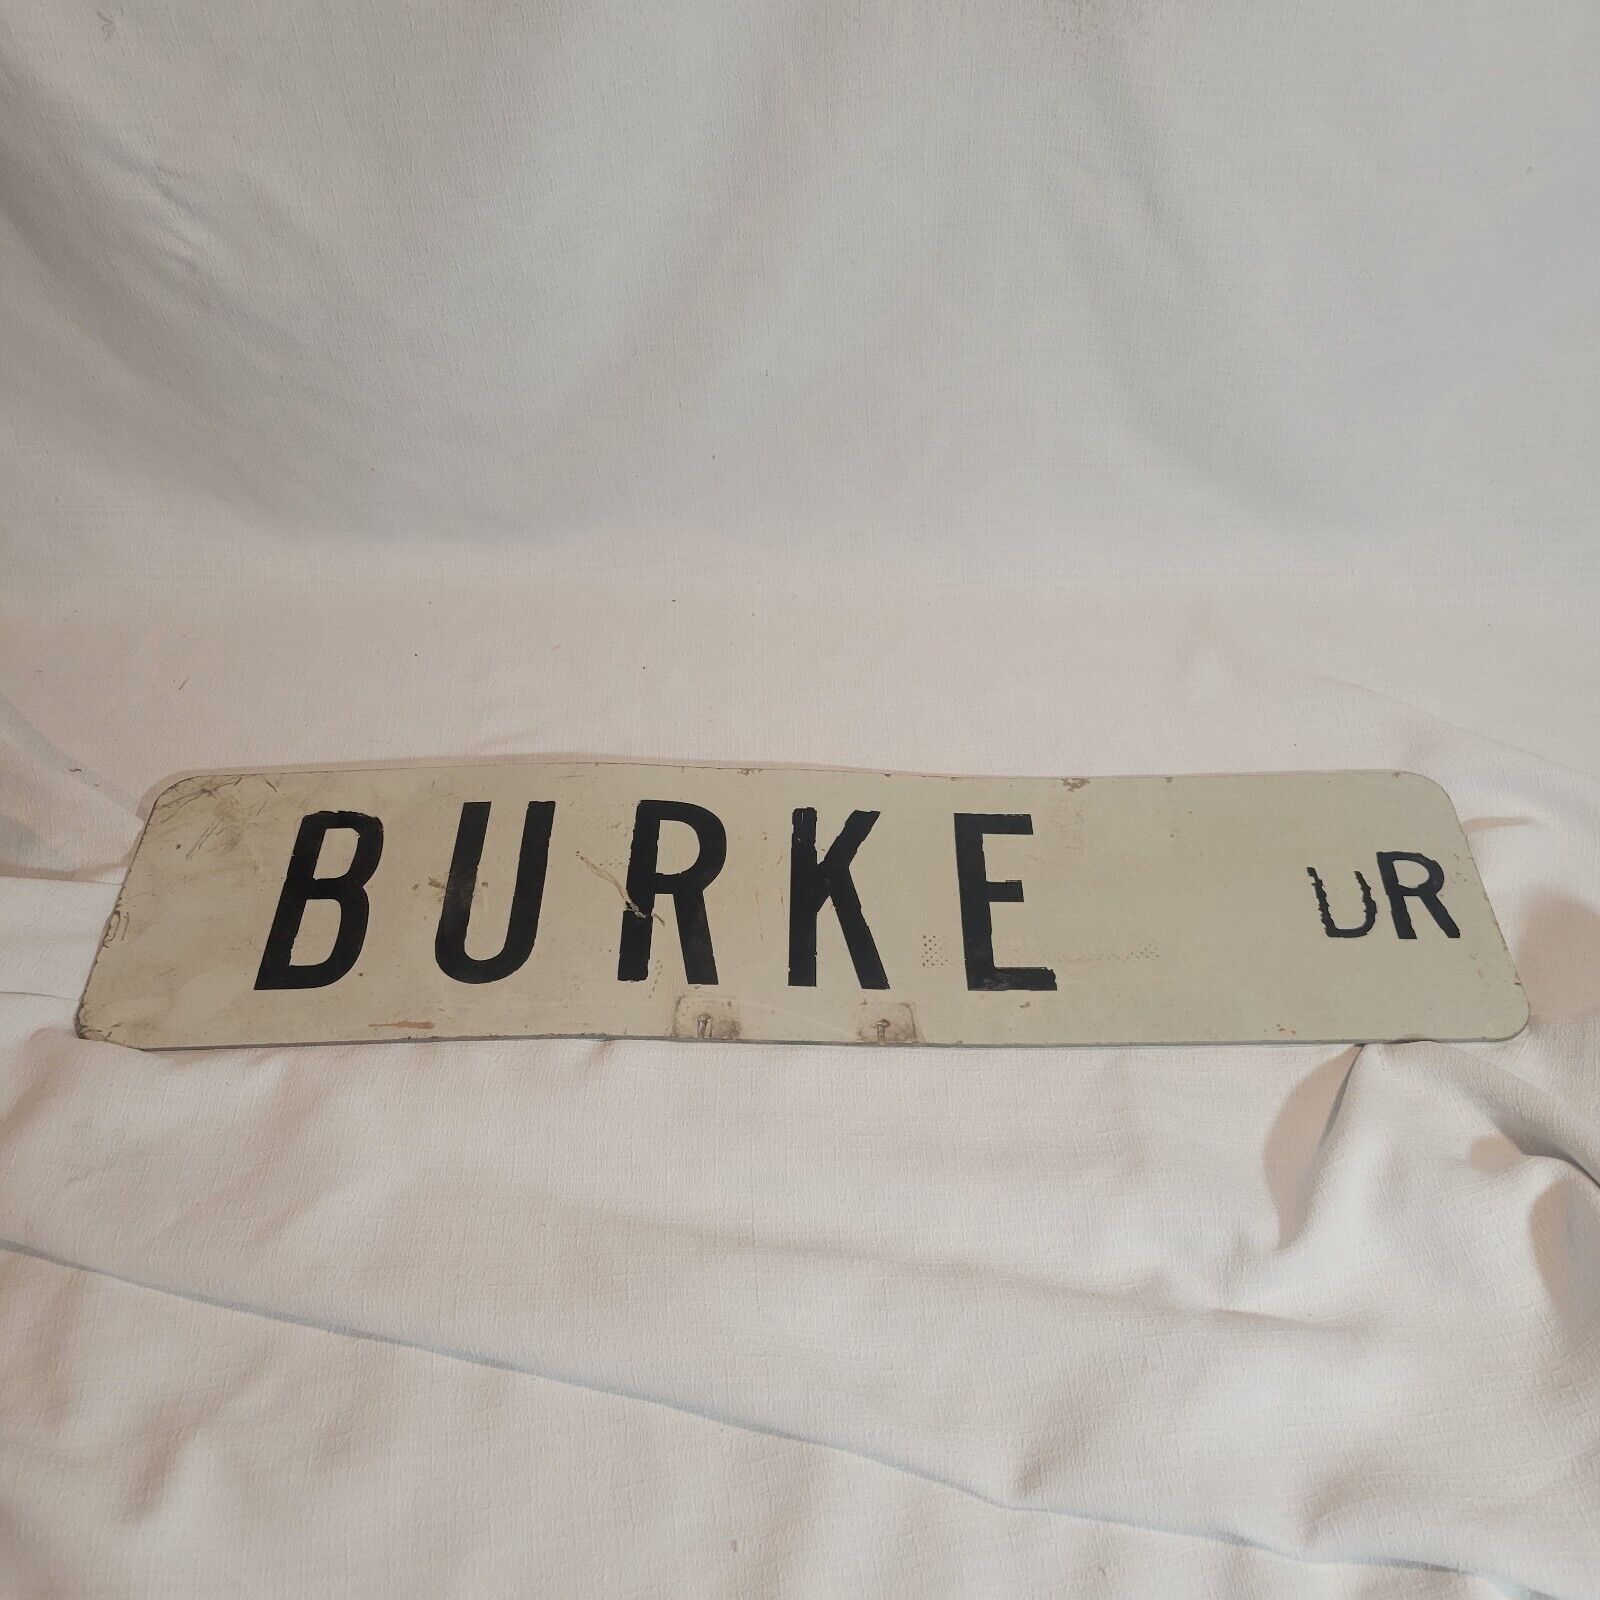 Authentic Retired Road Street Sign (Burke) 24x6